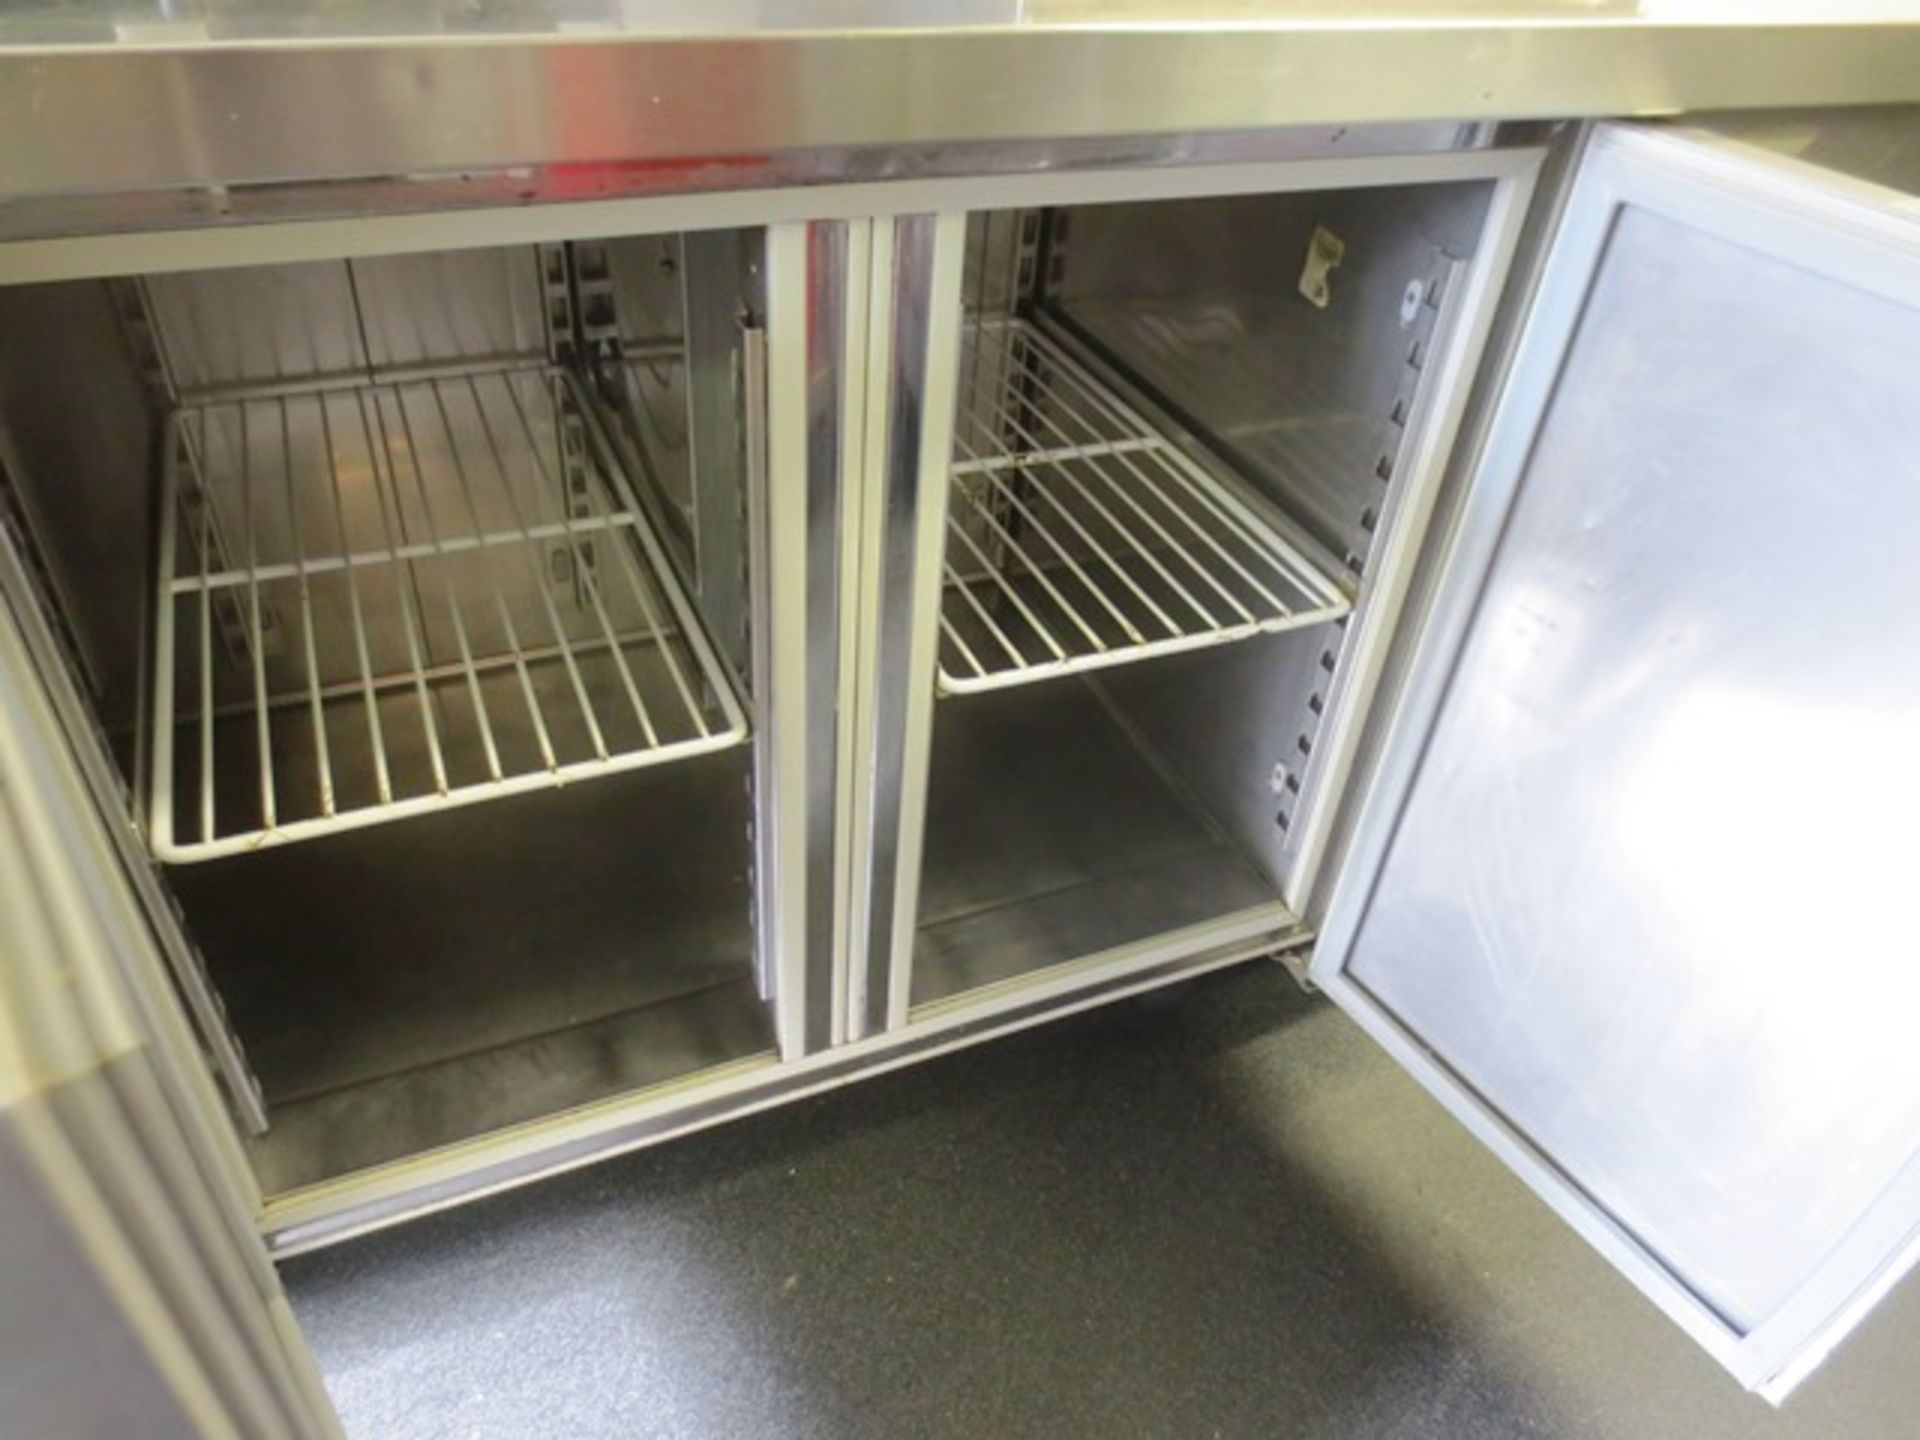 Stainless steel triple door refridgerated counter unit (240v), approx dimensions: 1800 x 700mm - Image 2 of 3